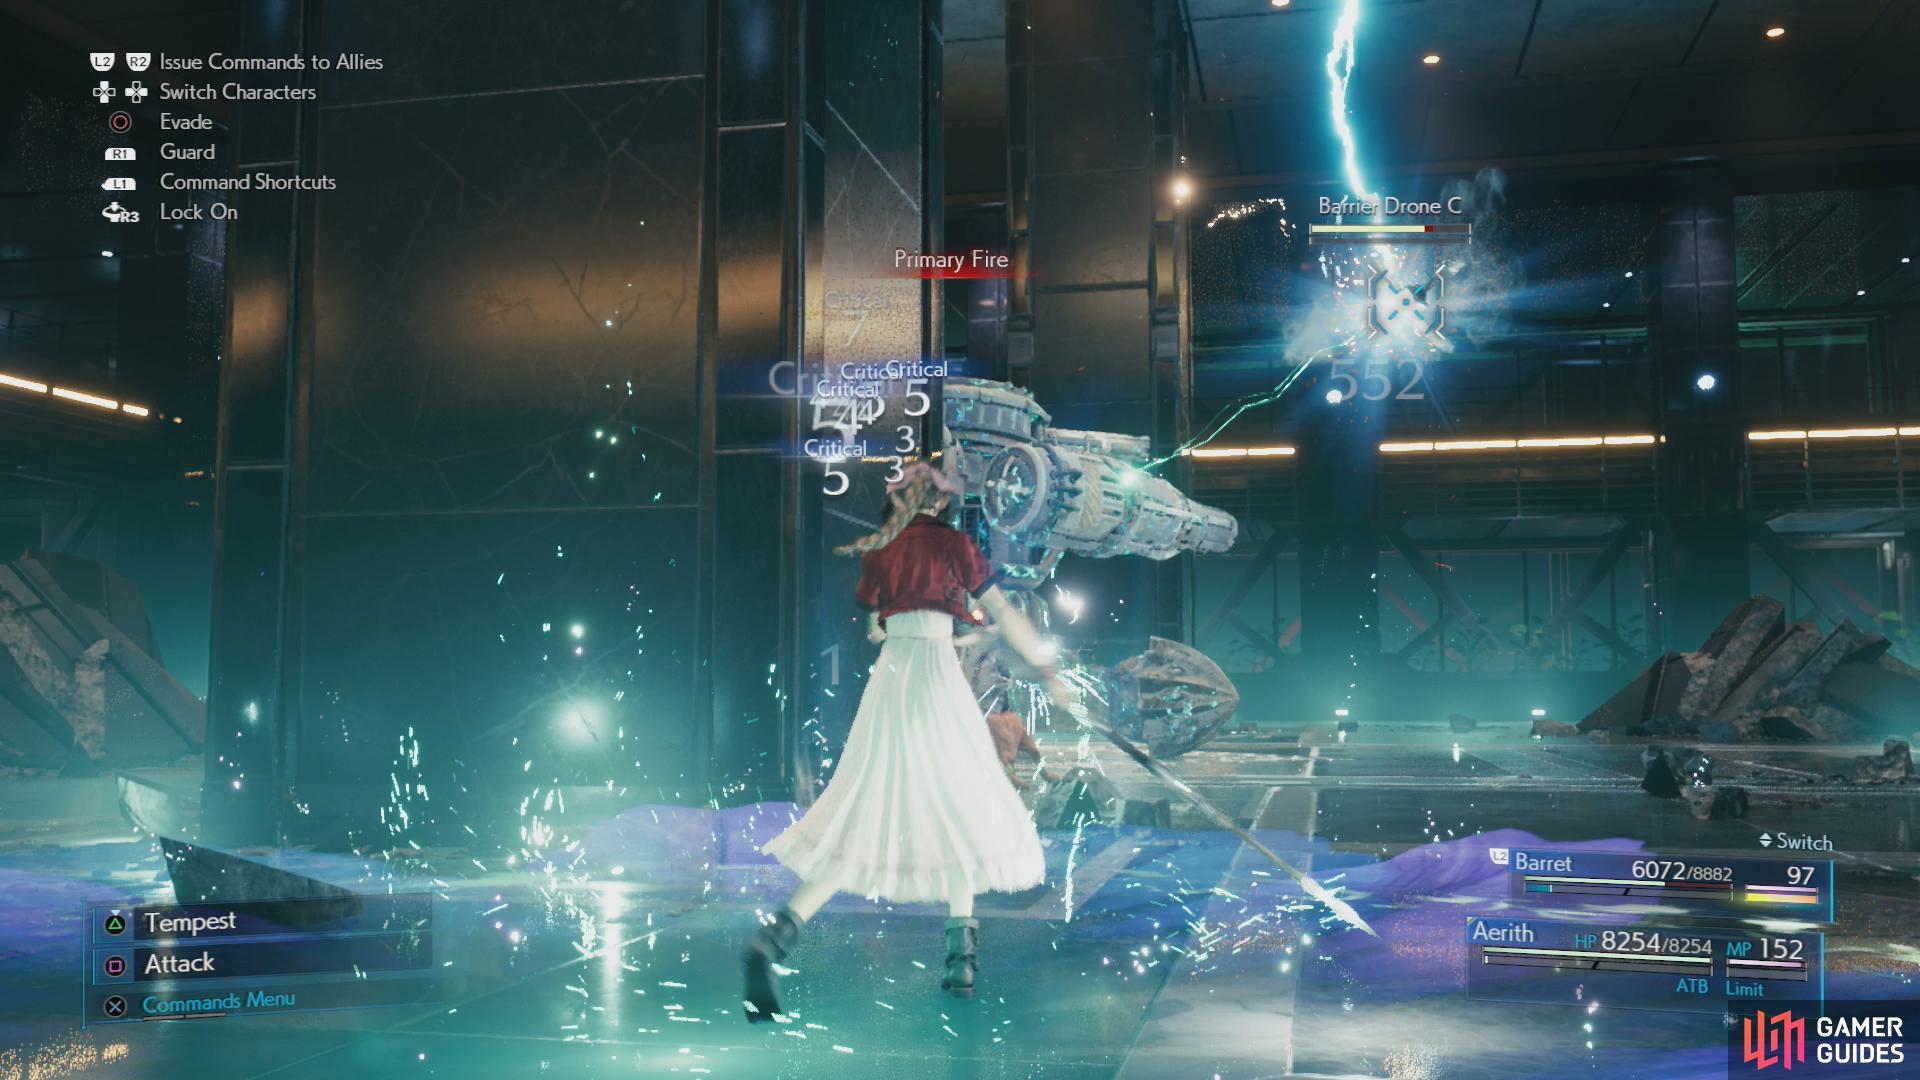 while Aerith should take potshots at the central one, or at a variety of targets, as her MP allows.